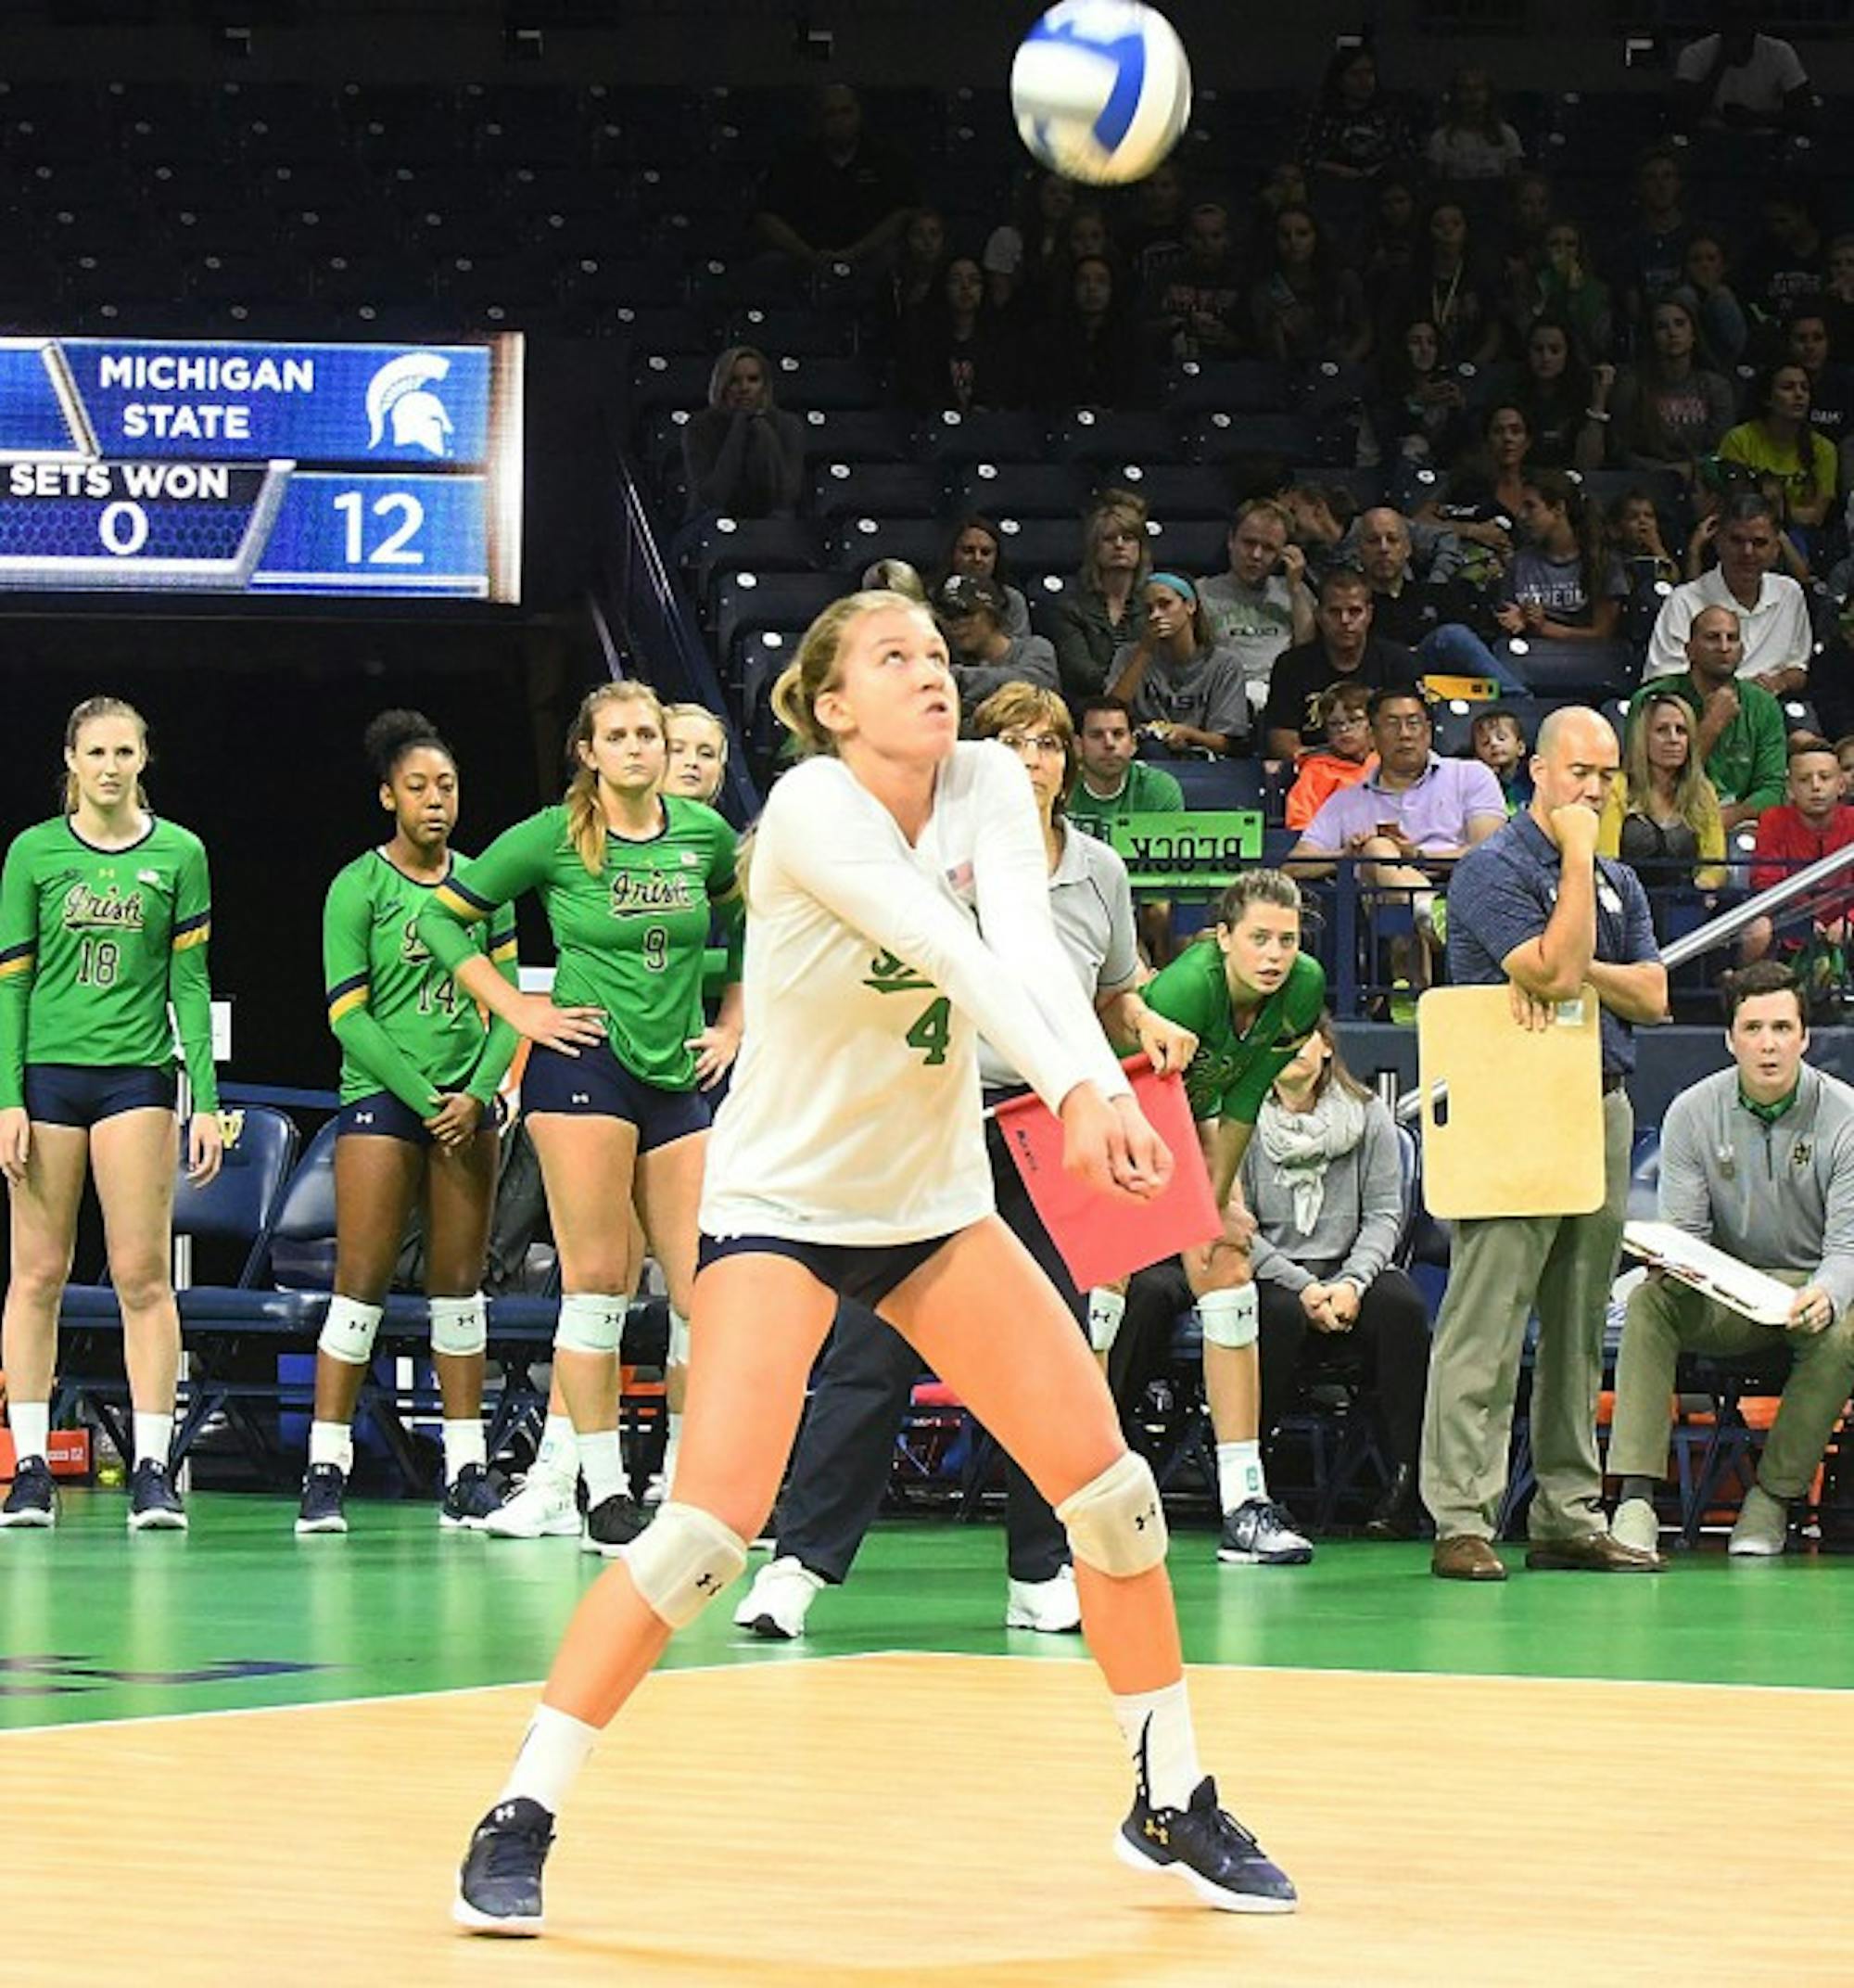 Irish junior Ryann DeJarld prepares to hit the ball during Notre Dame's 3-0 win over Michigan State on Sept. 15 at Purcell Pavilion. DeJarld now has 1,547 career digs, third all-time in program history.